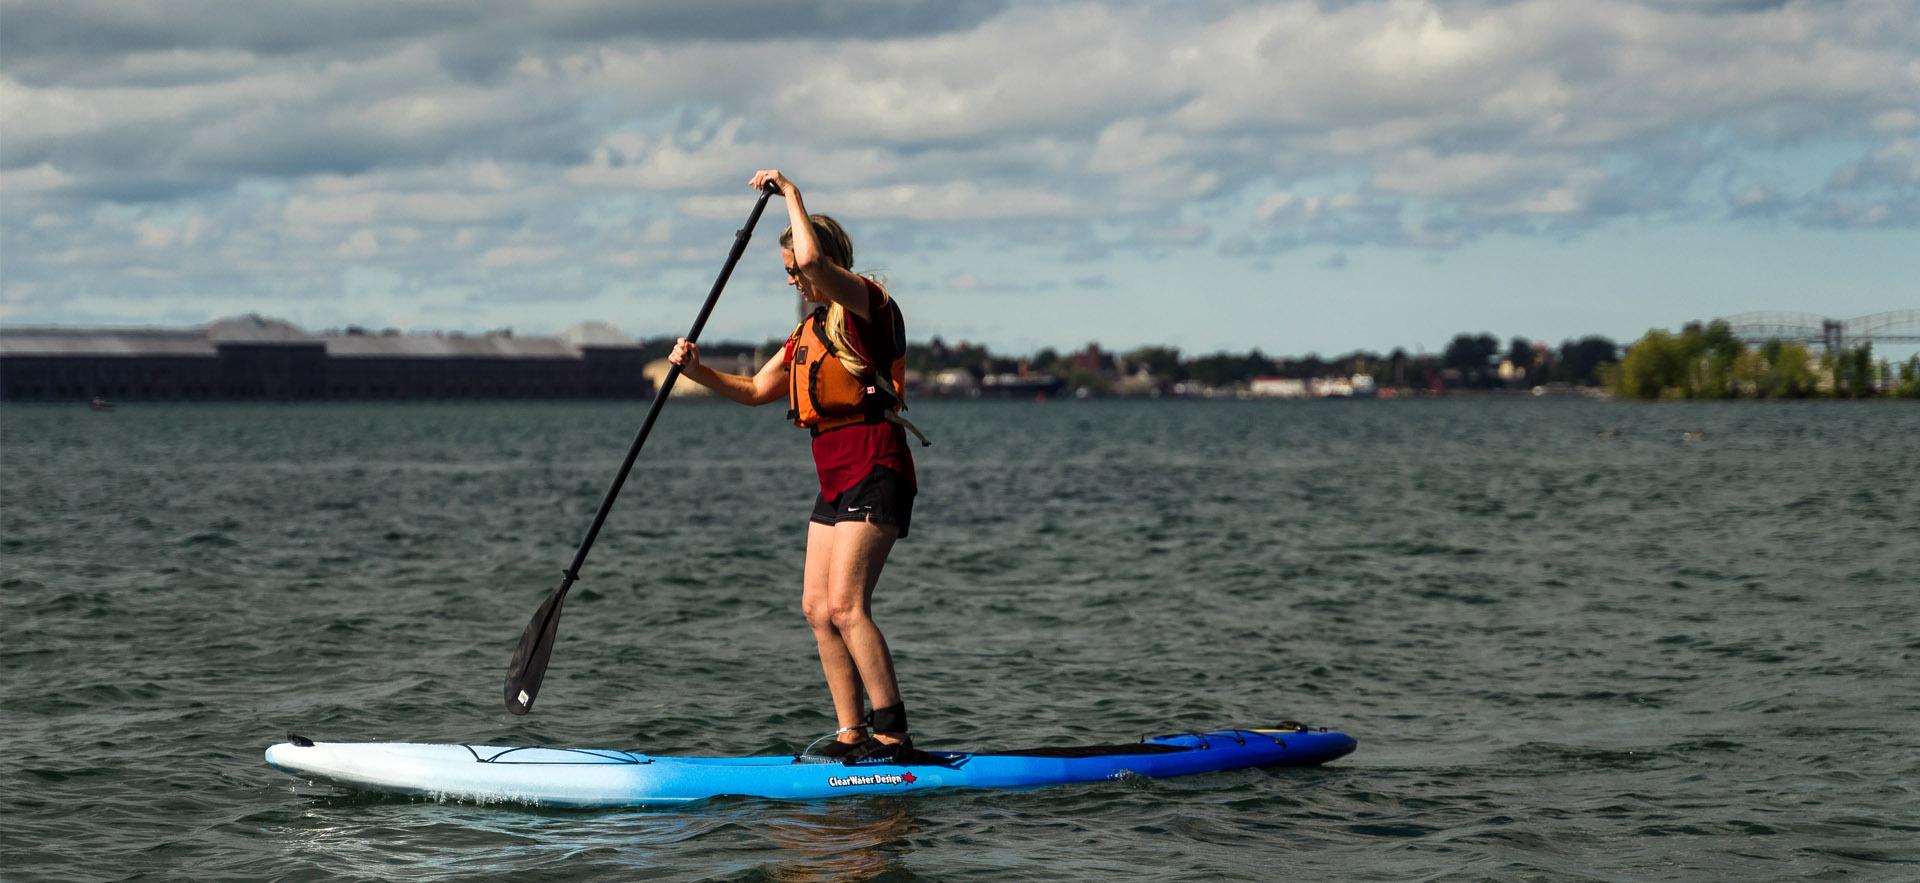 Girl on stand-up paddle-board on river